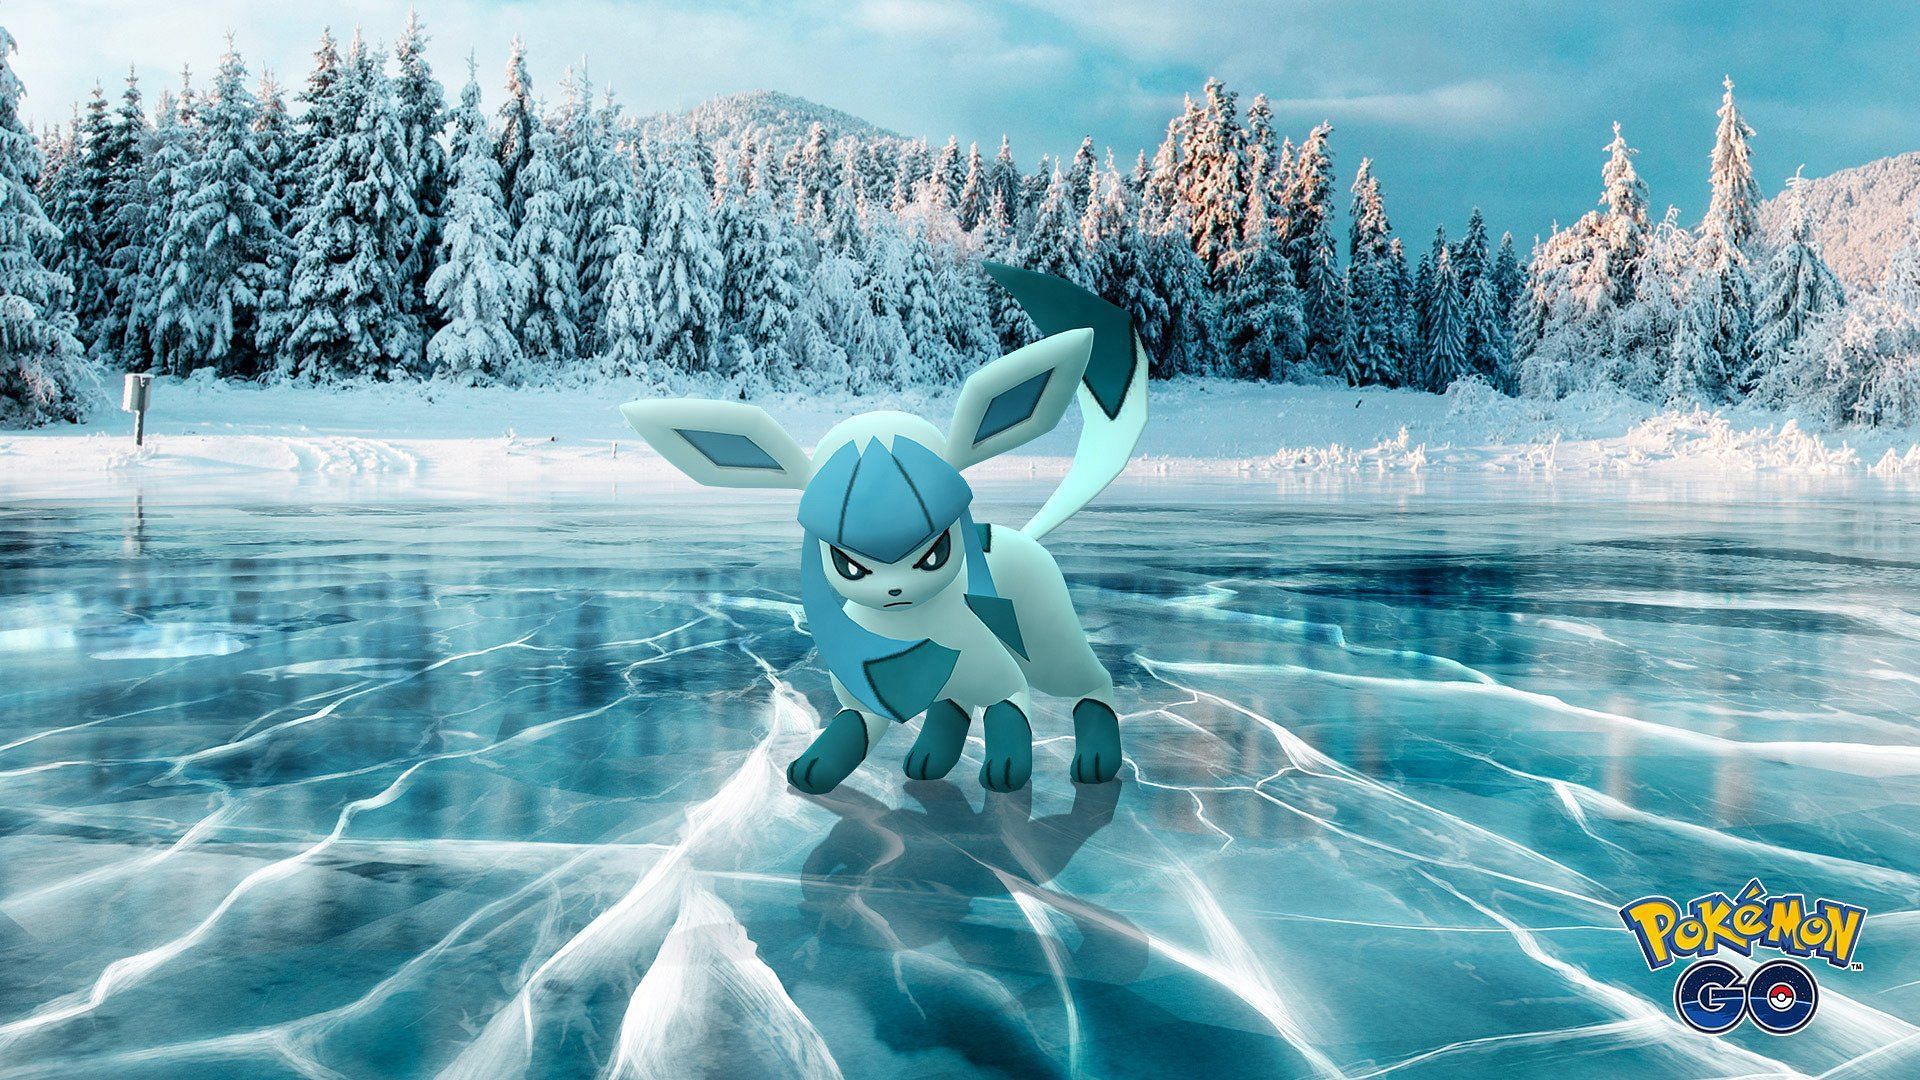 Glaceon is appearing as raid boss in Pokemon GO this December (Image via Niantic)